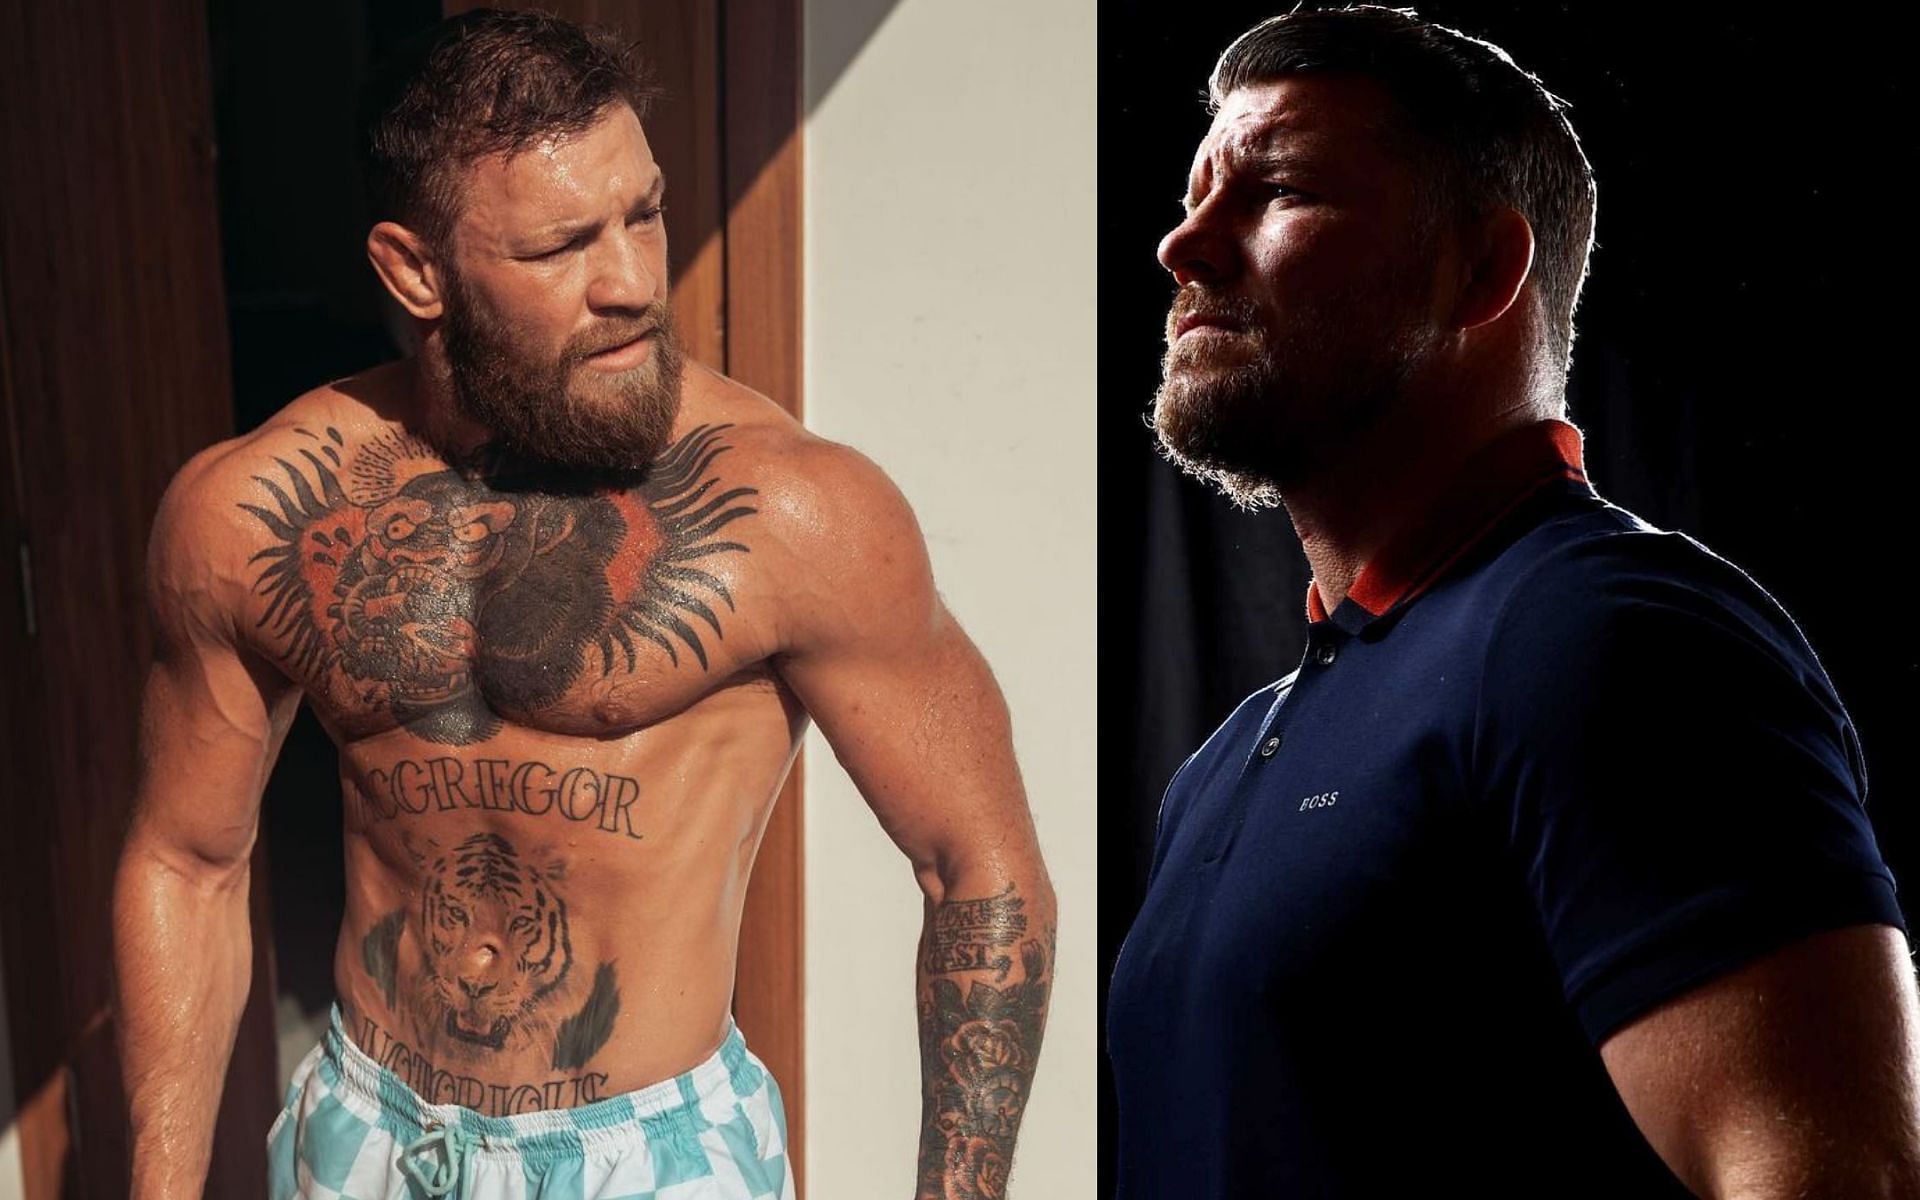 Conor McGregor (Right) and Michael Bisping (Right) [Images via: @thenotoriousmma and @mikebisping on Instagram]